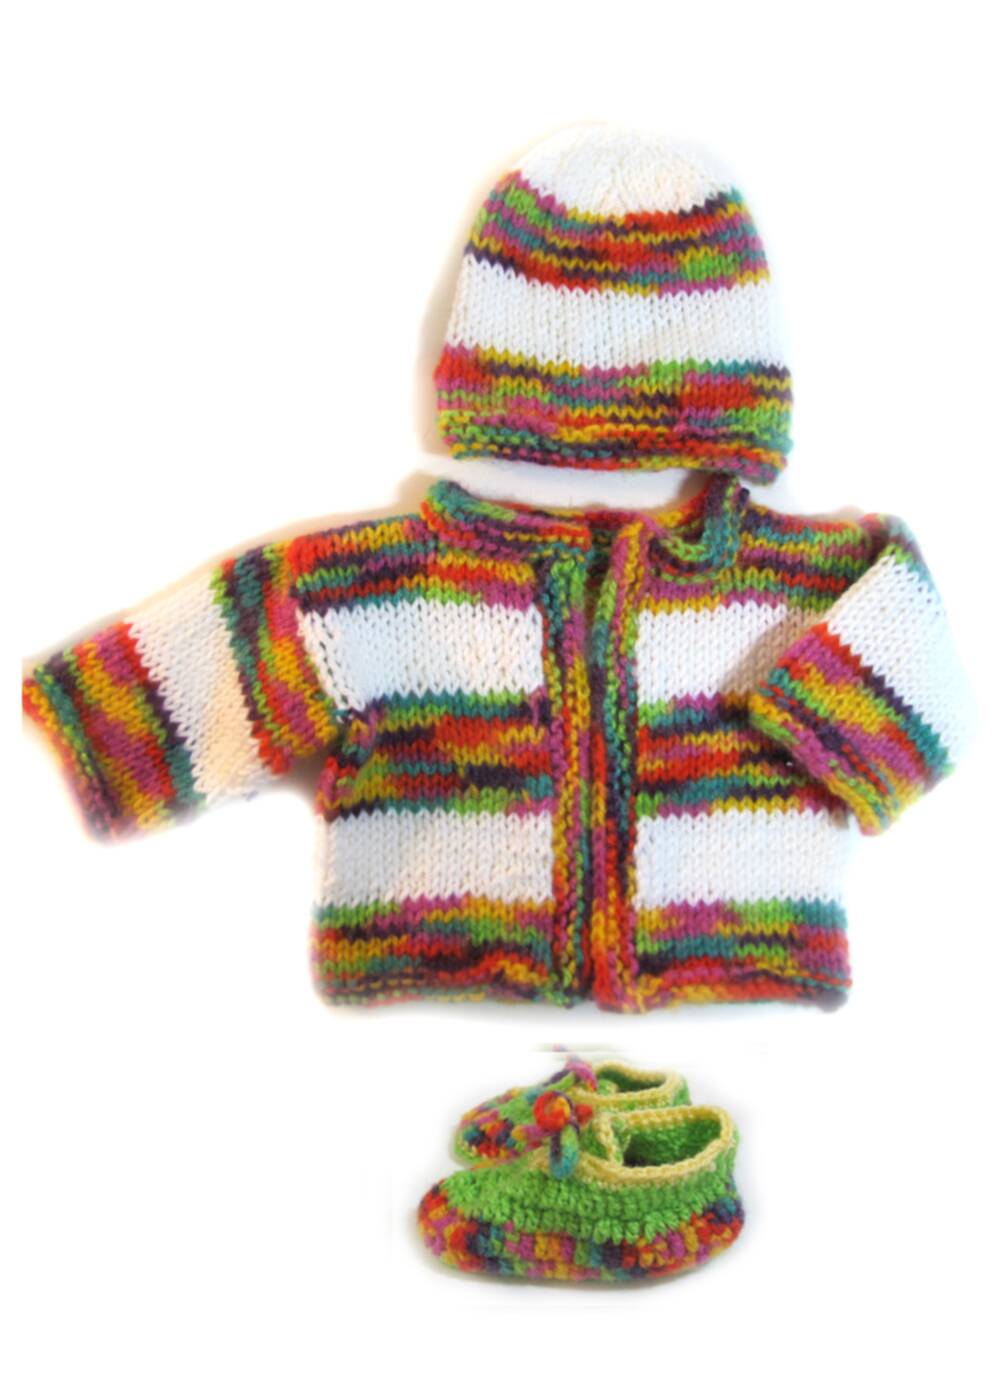 KSS Rainbow Knitted Baby Sweater/Jacket Set 9 Months SW-501 - Click Image to Close